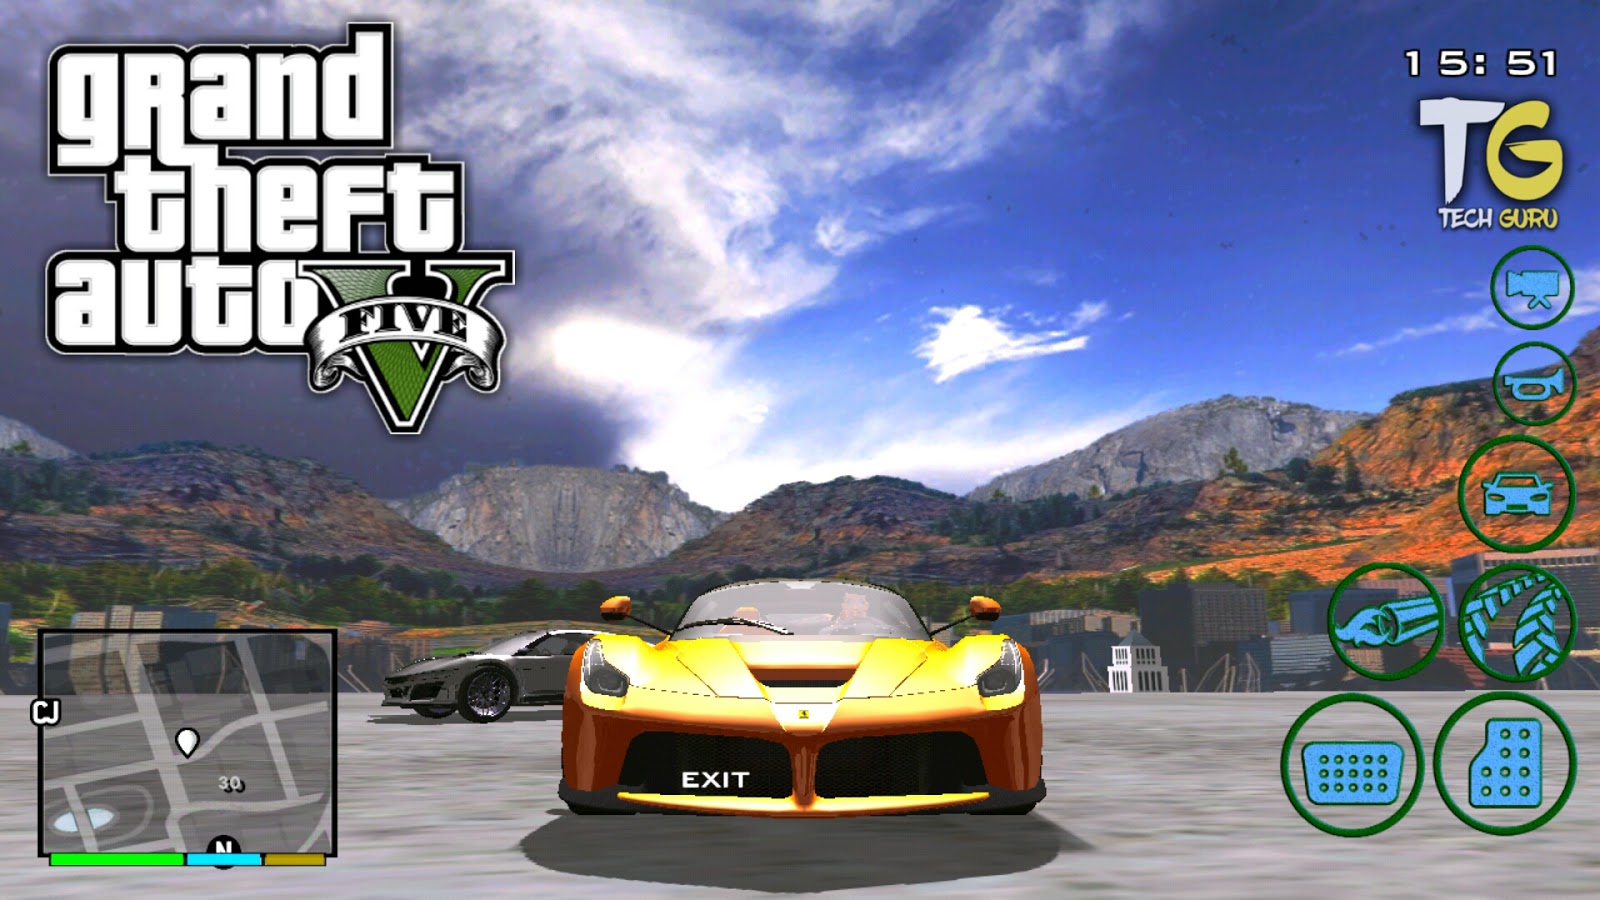 Gta 5 Android Apk Data Download 2020